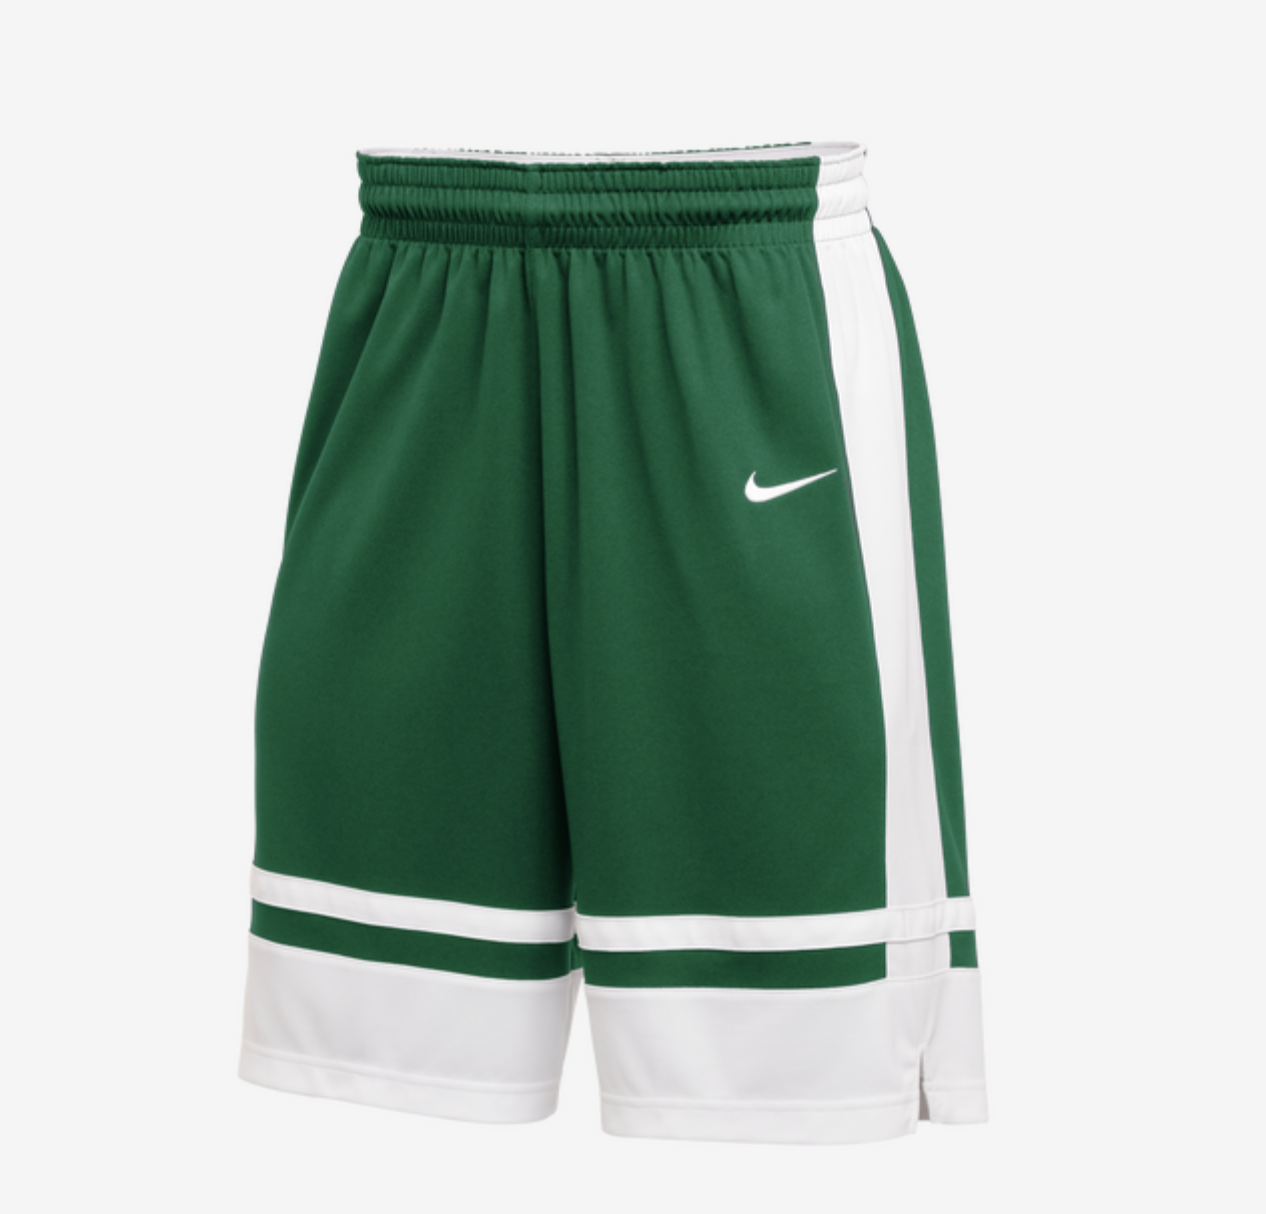 65% OFF the Nike Elite Practice Team Shorts — Sneaker Shouts